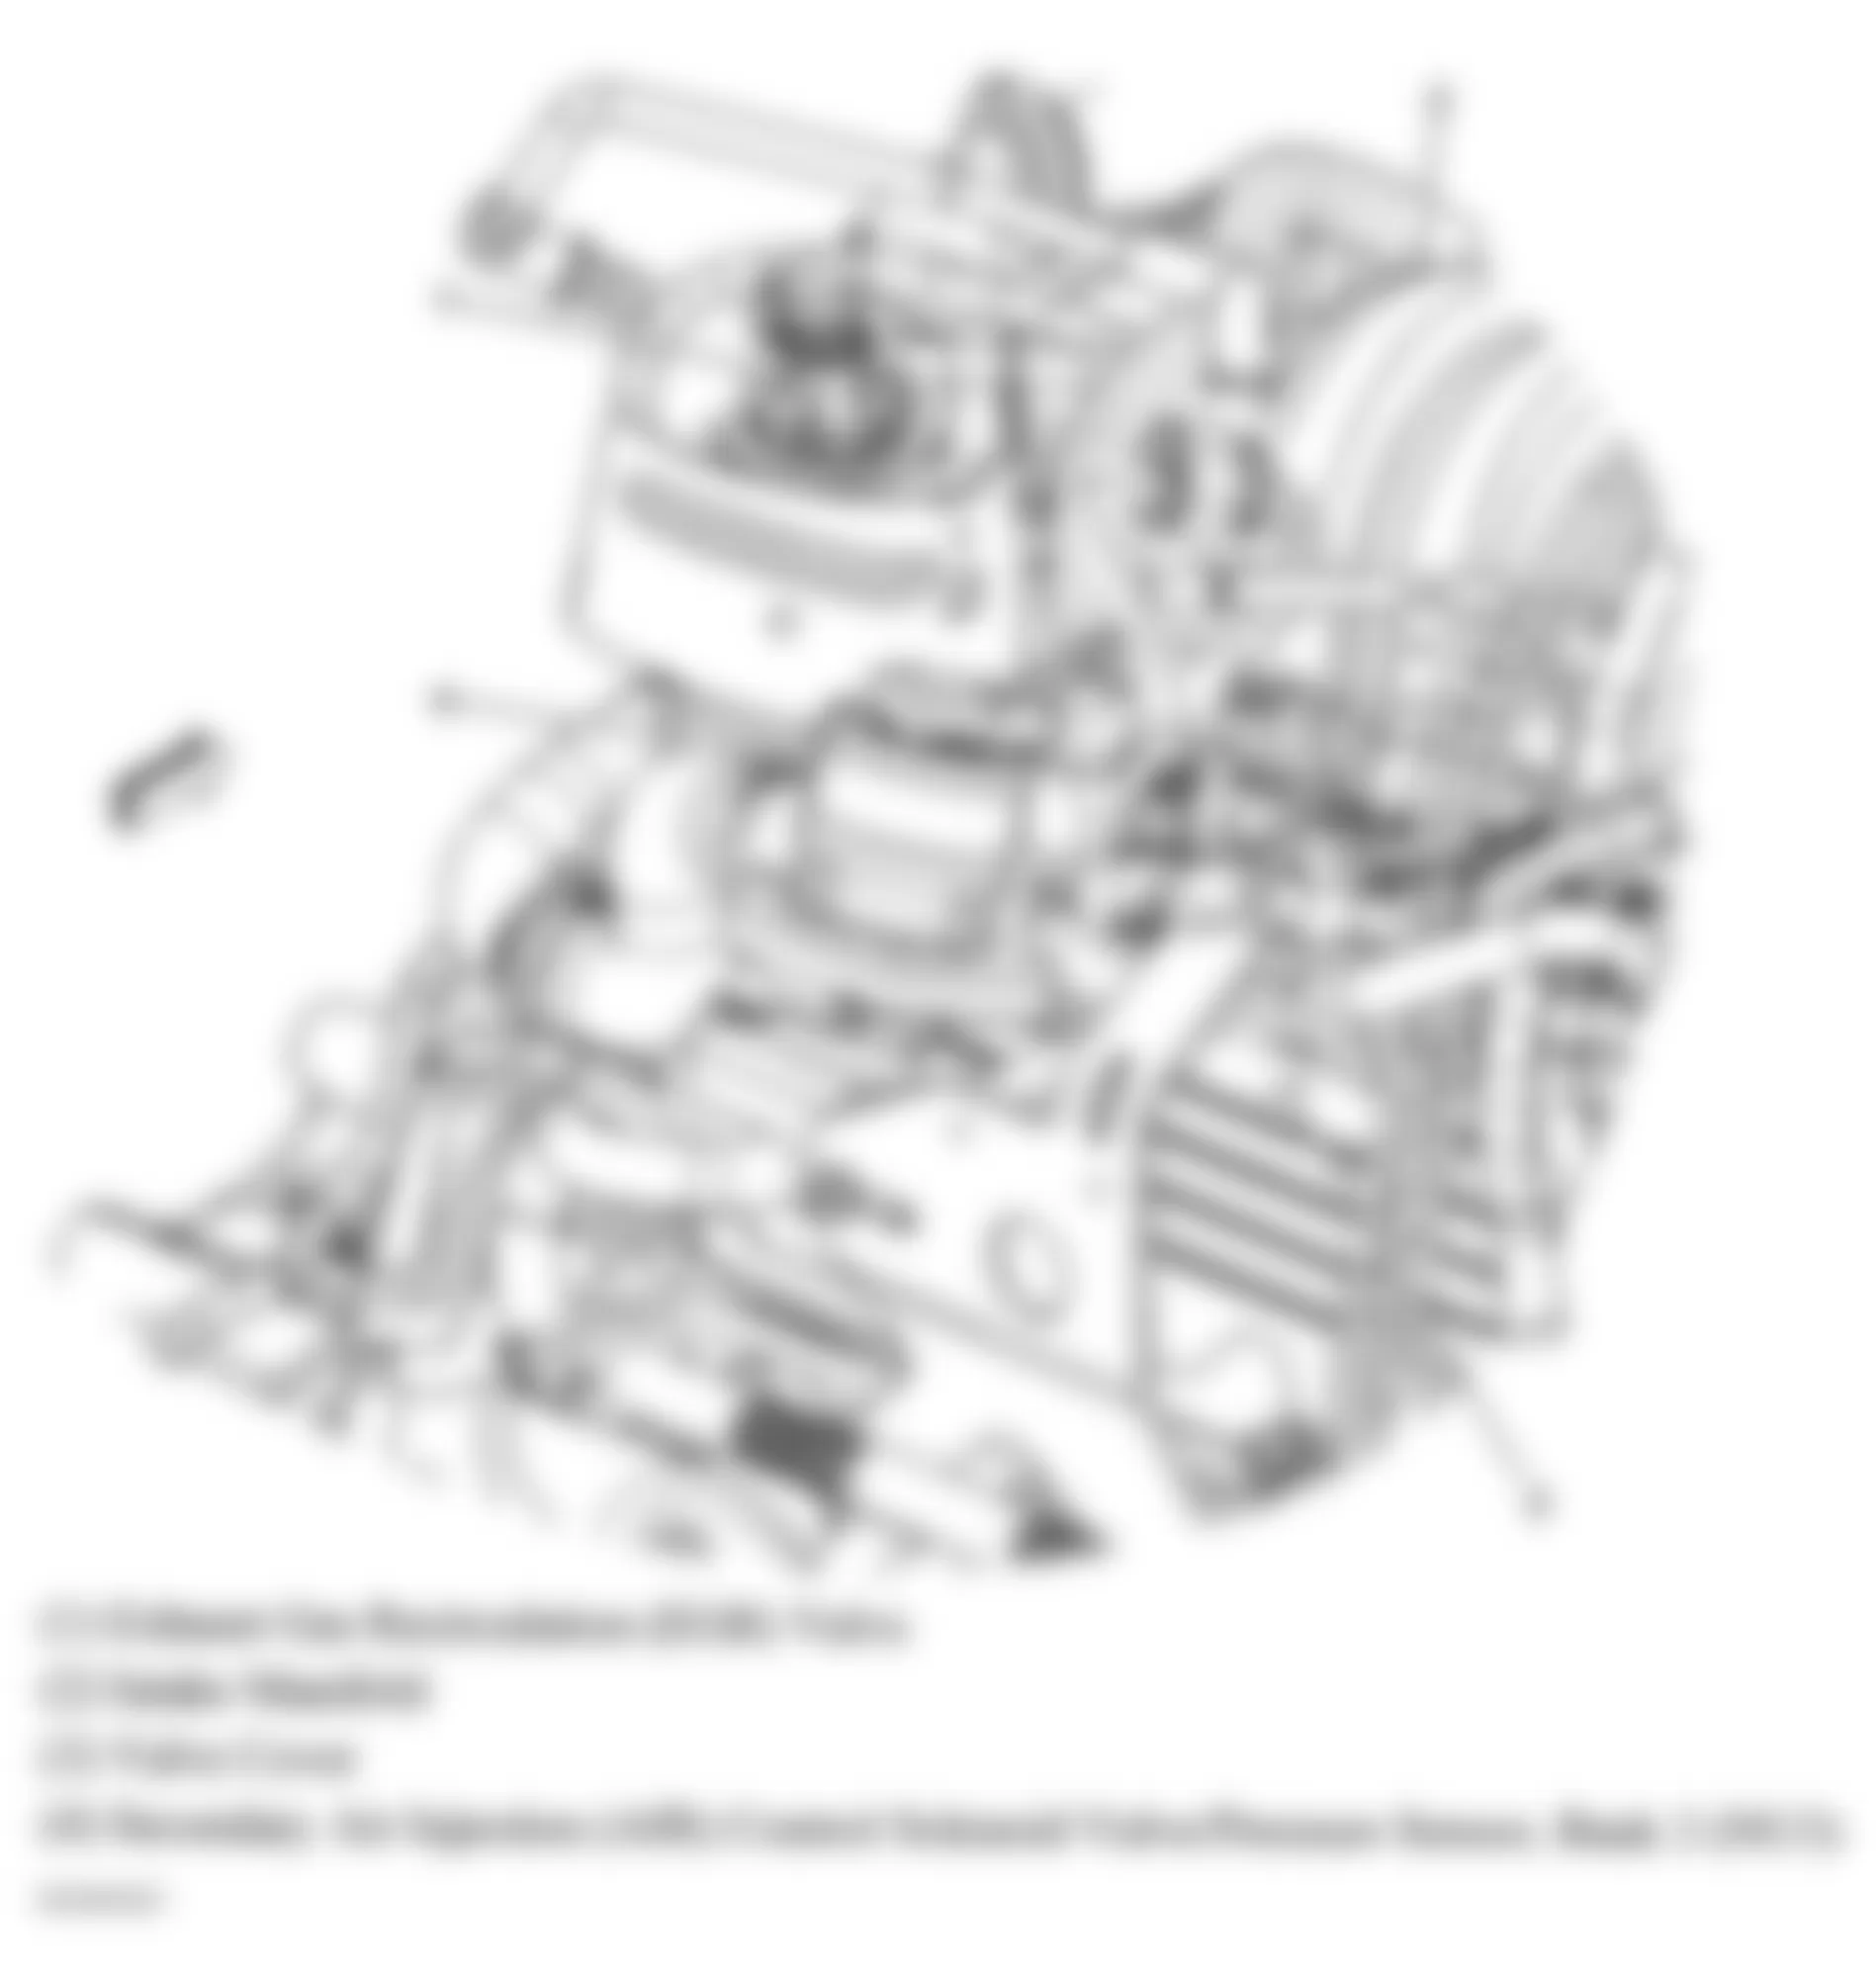 Buick LaCrosse CXL 2006 - Component Locations -  Upper Rear Of Engine (3.8L)